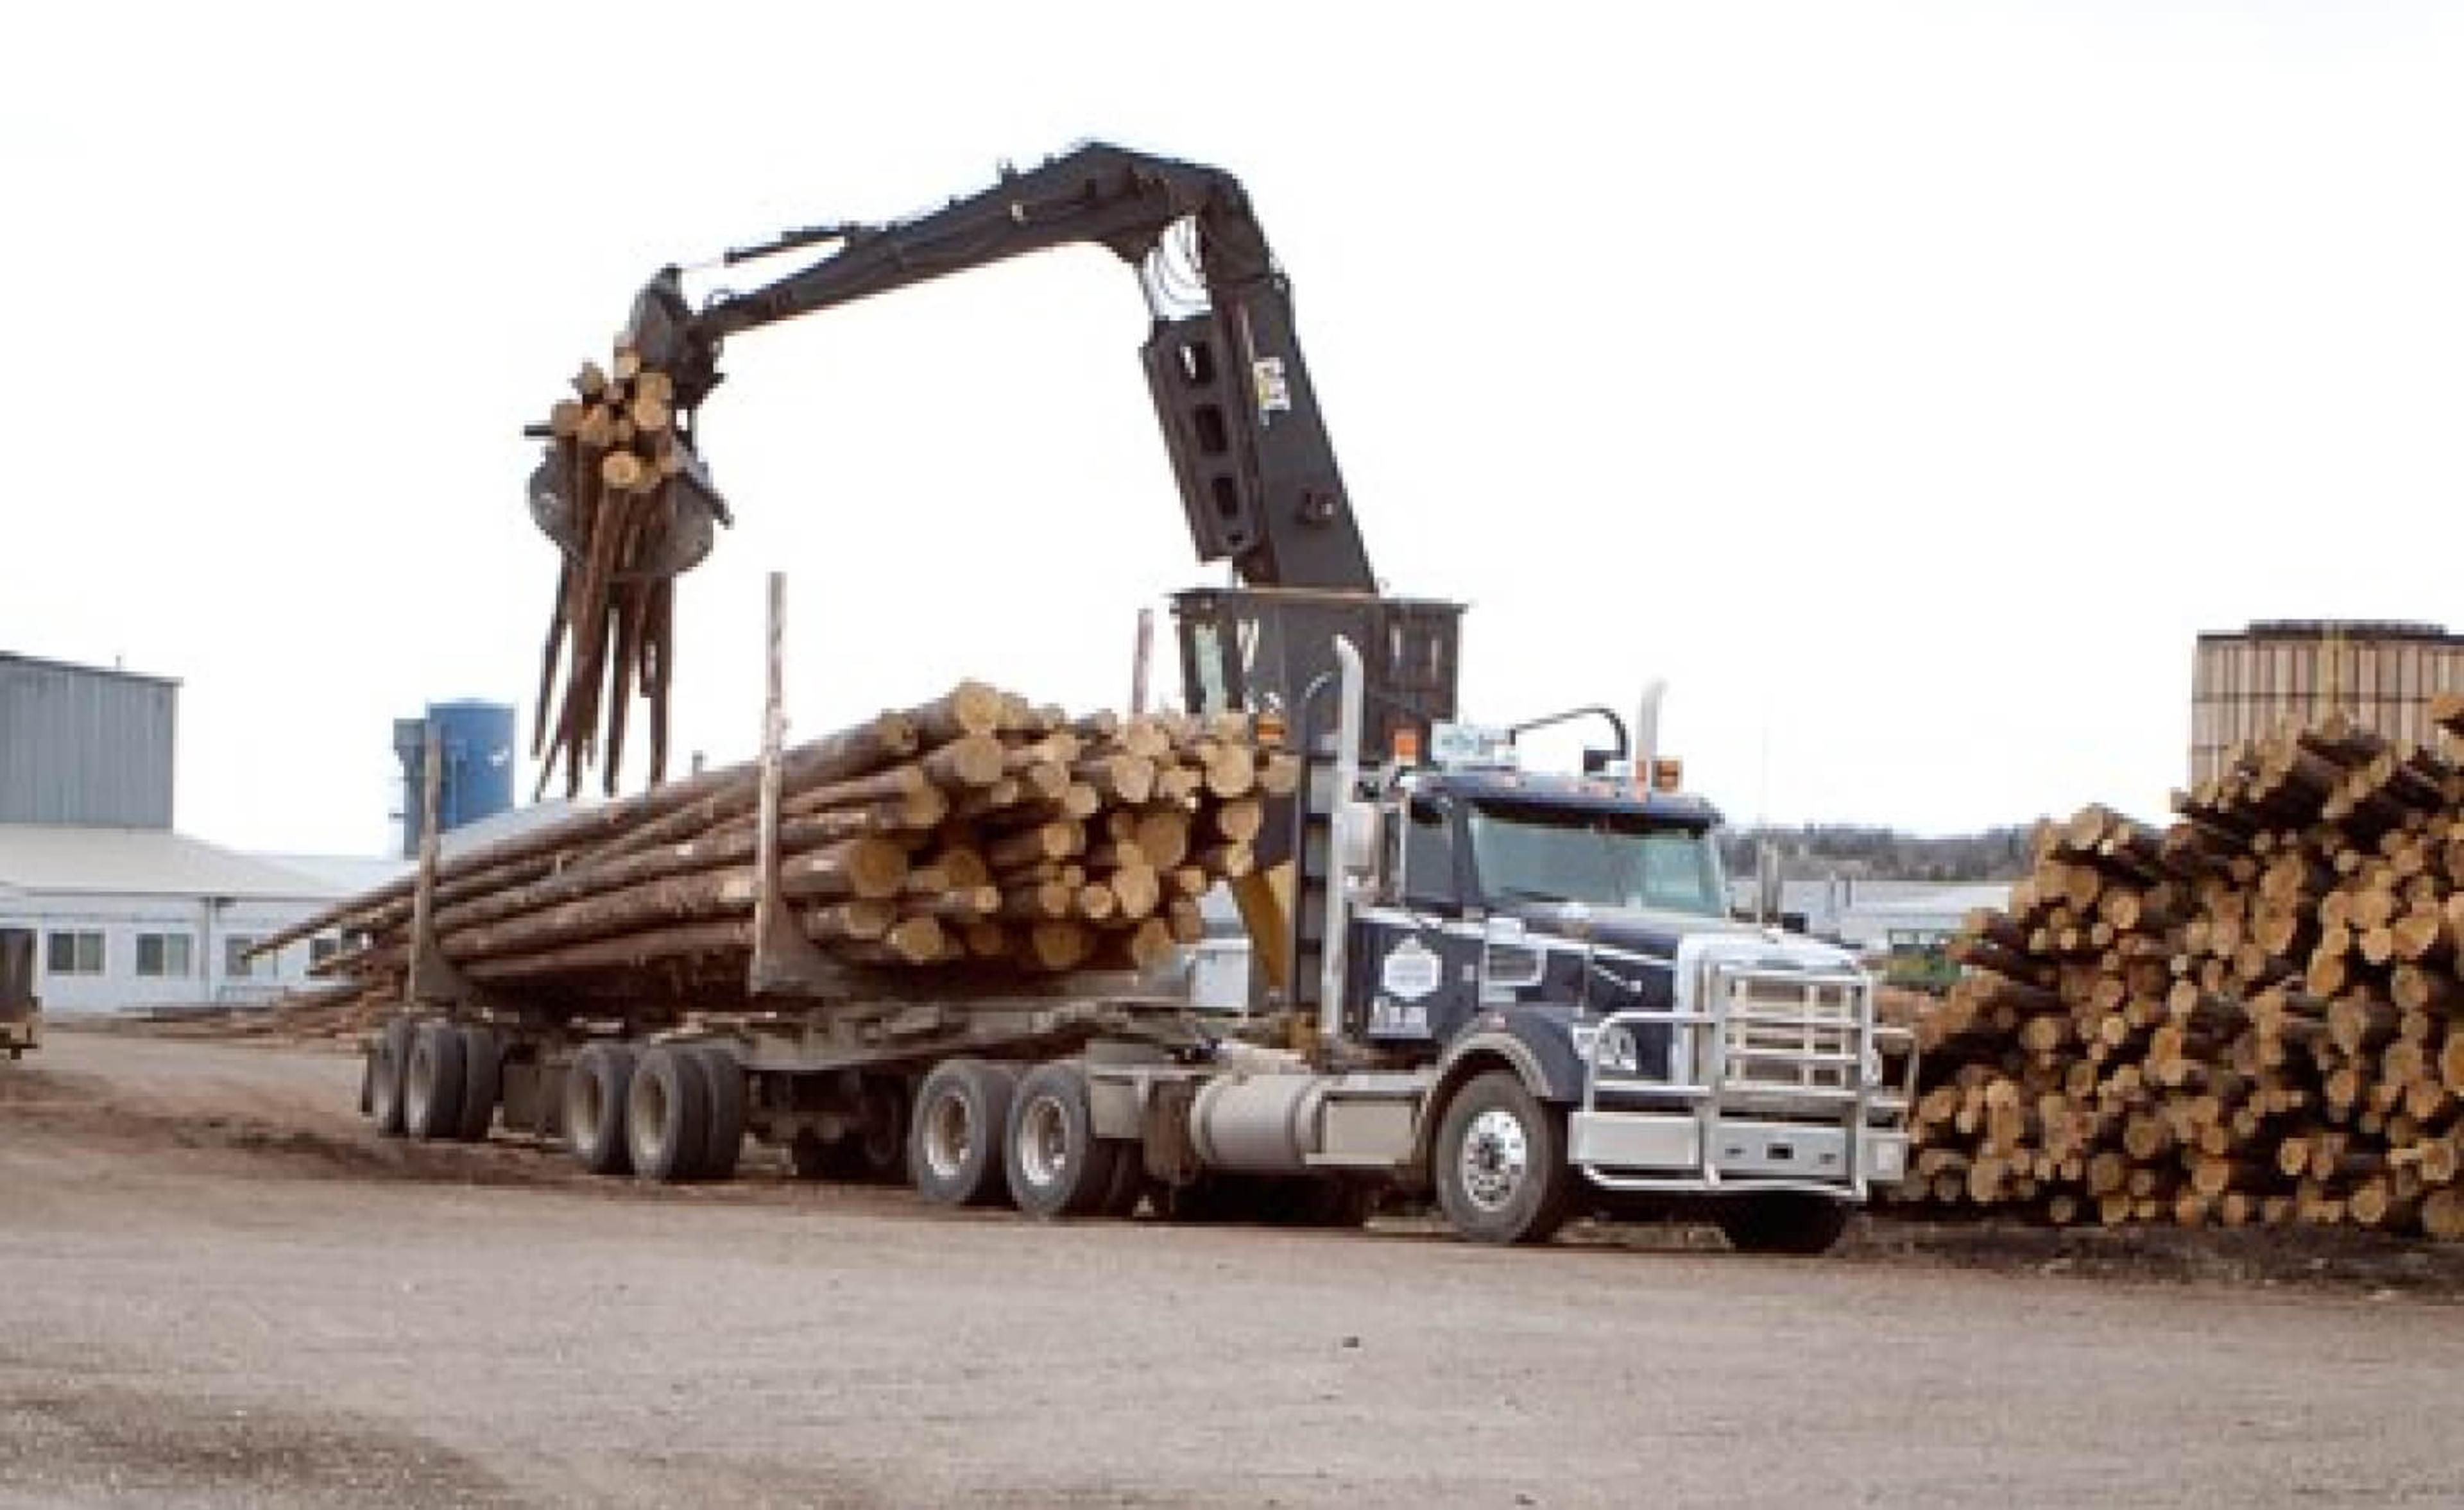 A semi truck loading up with lumber.